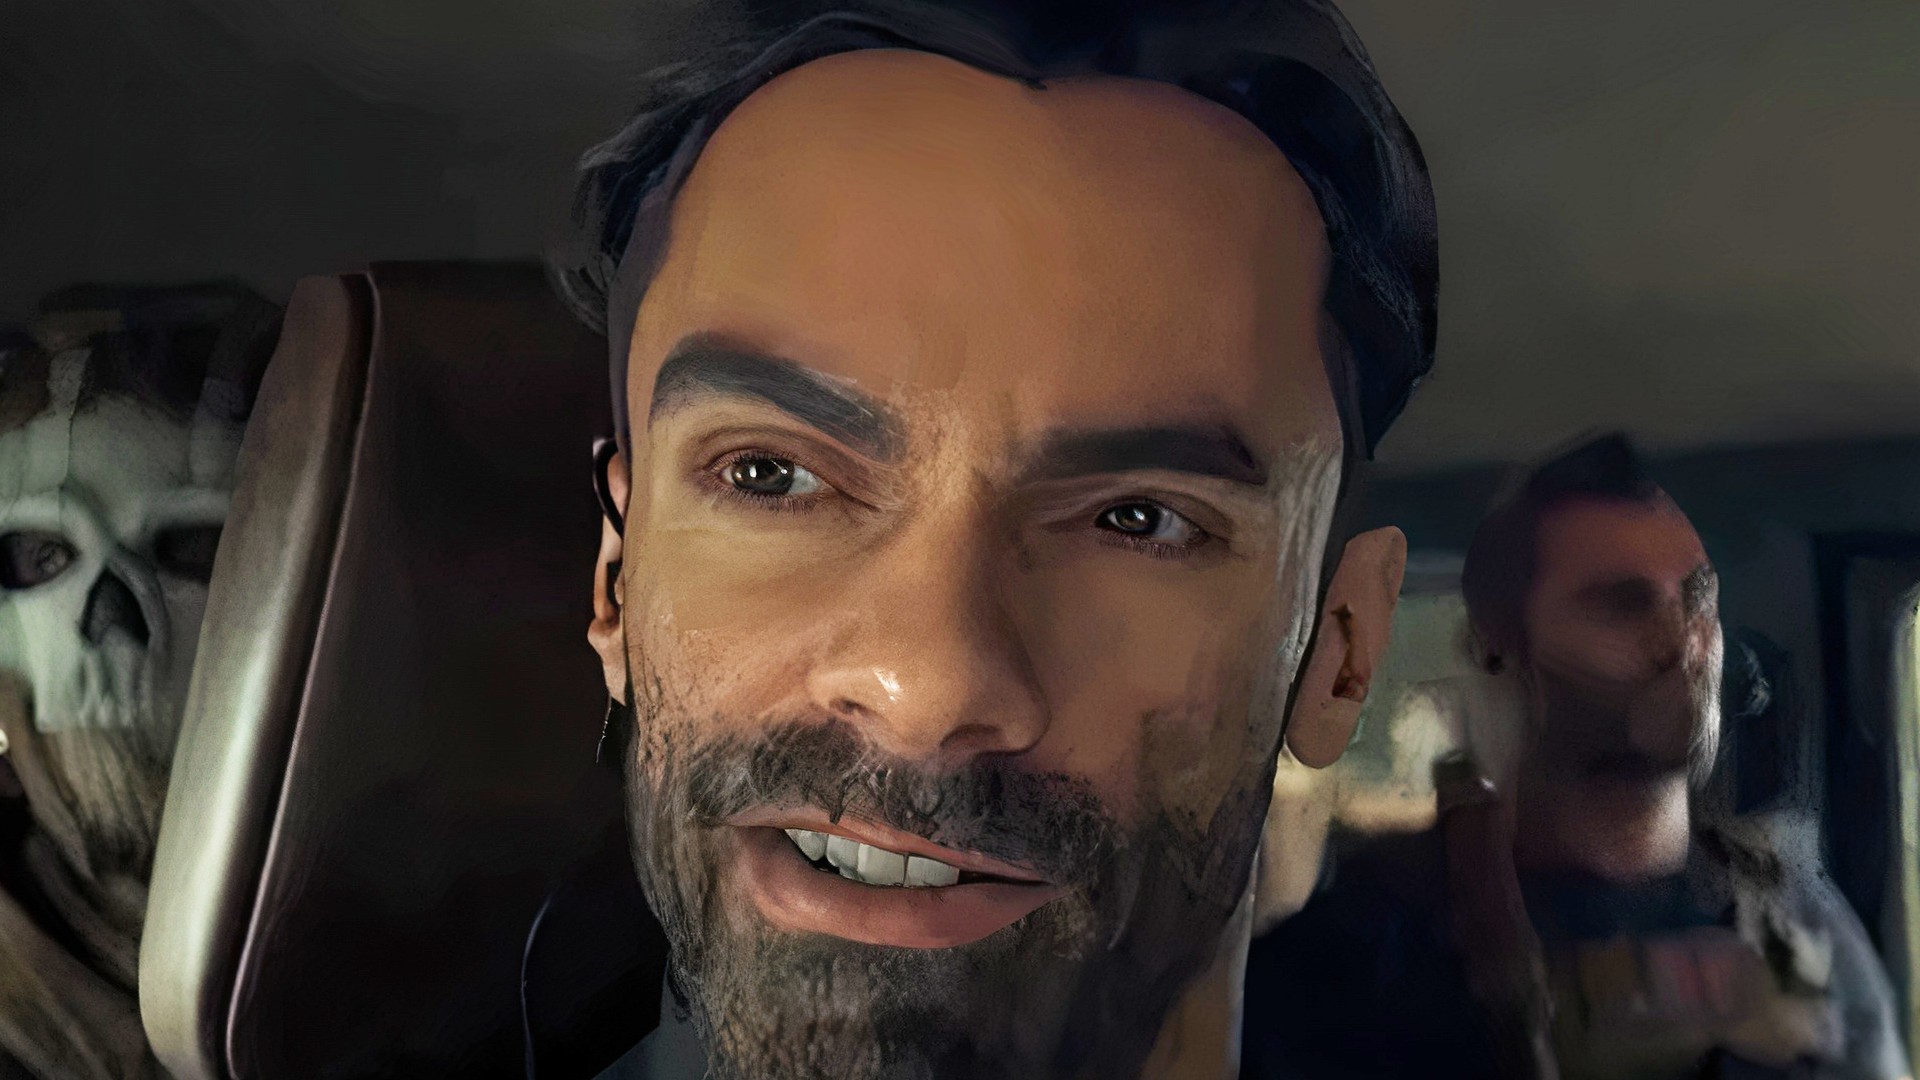 CALL OF DUTY: MODERN WARFARE 2 -Voice Actors, Face Models